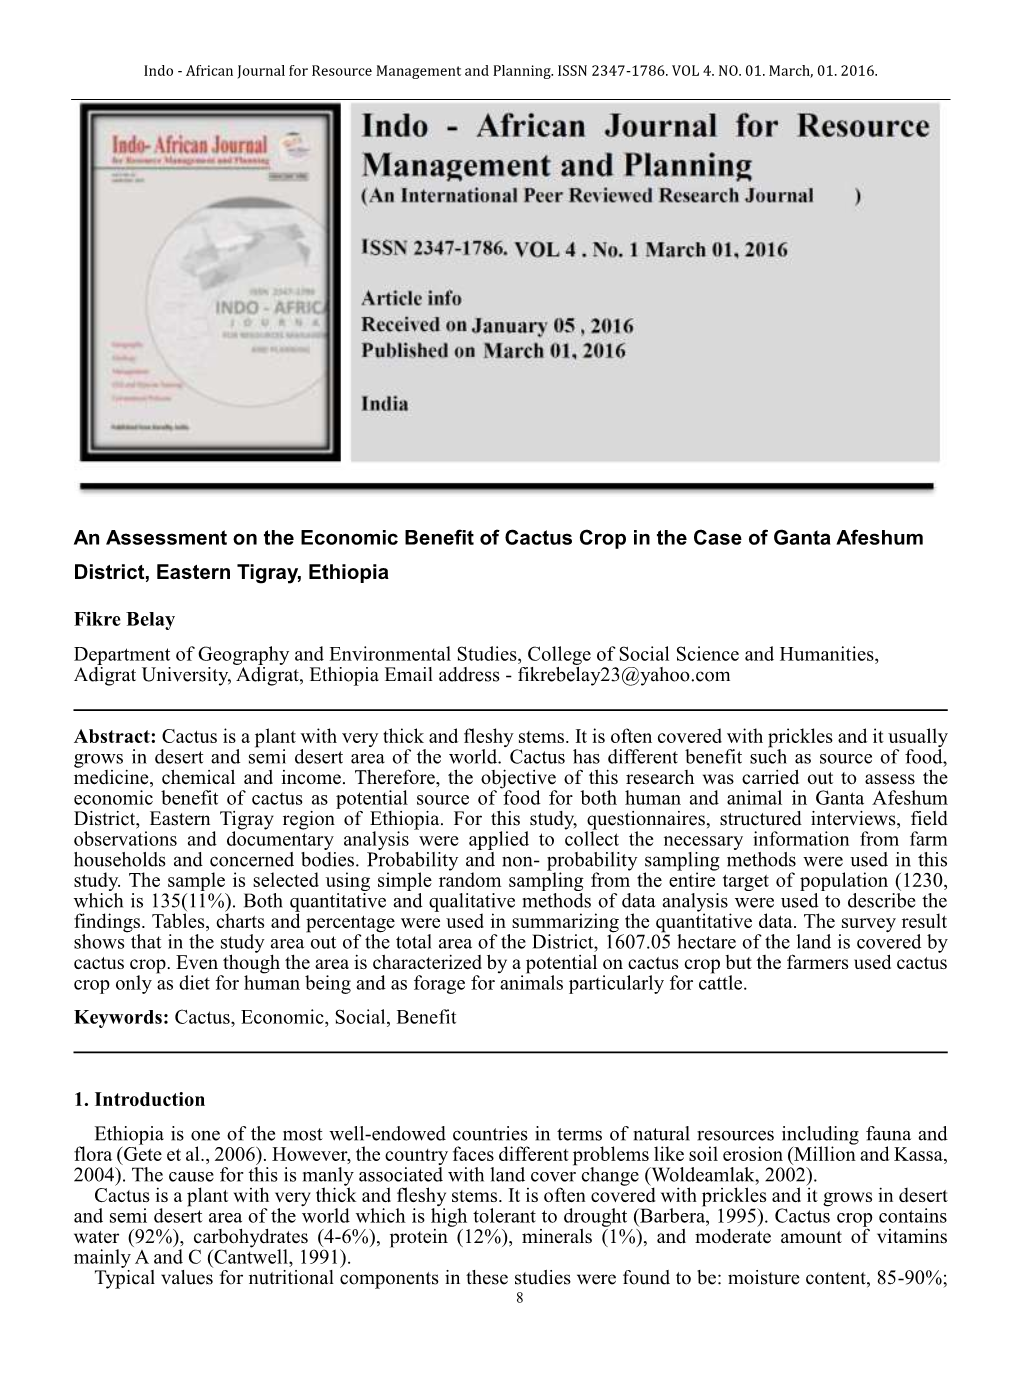 An Assessment on the Economic Benefit of Cactus Crop in the Case of Ganta Afeshum District, Eastern Tigray, Ethiopia Fikre Belay